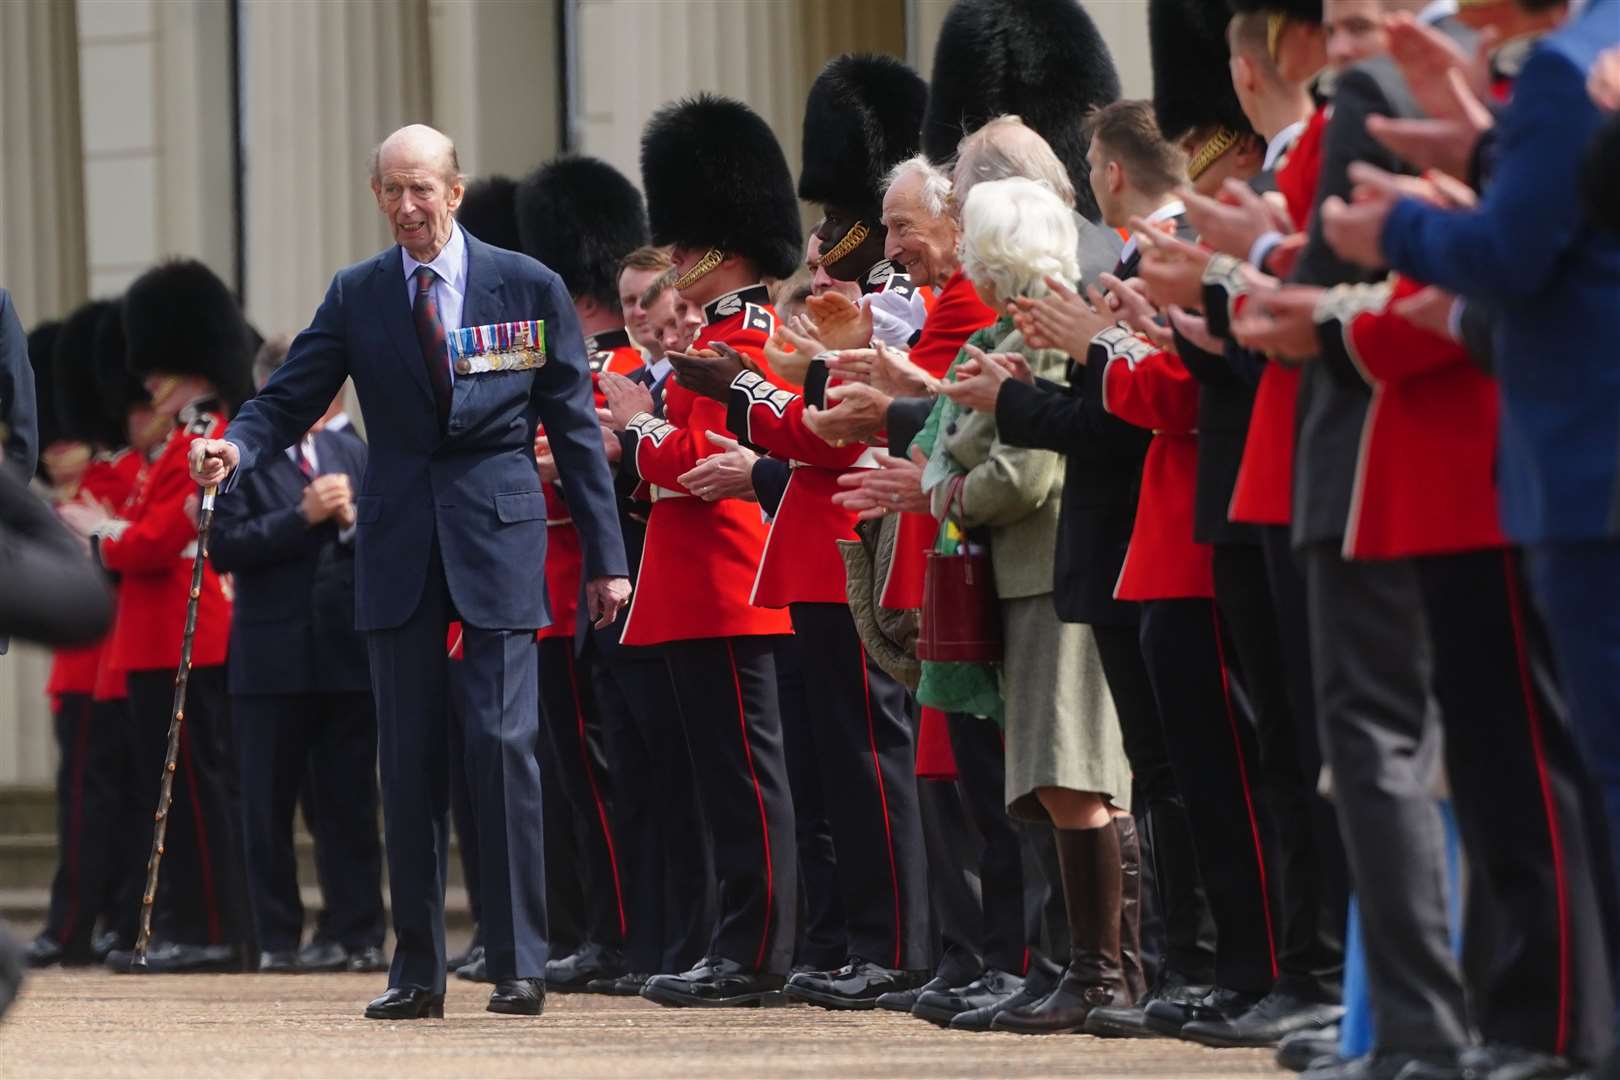 The 88-year-old royal was applauded as he left the Black Sunday parade (Victoria Jones/PA)